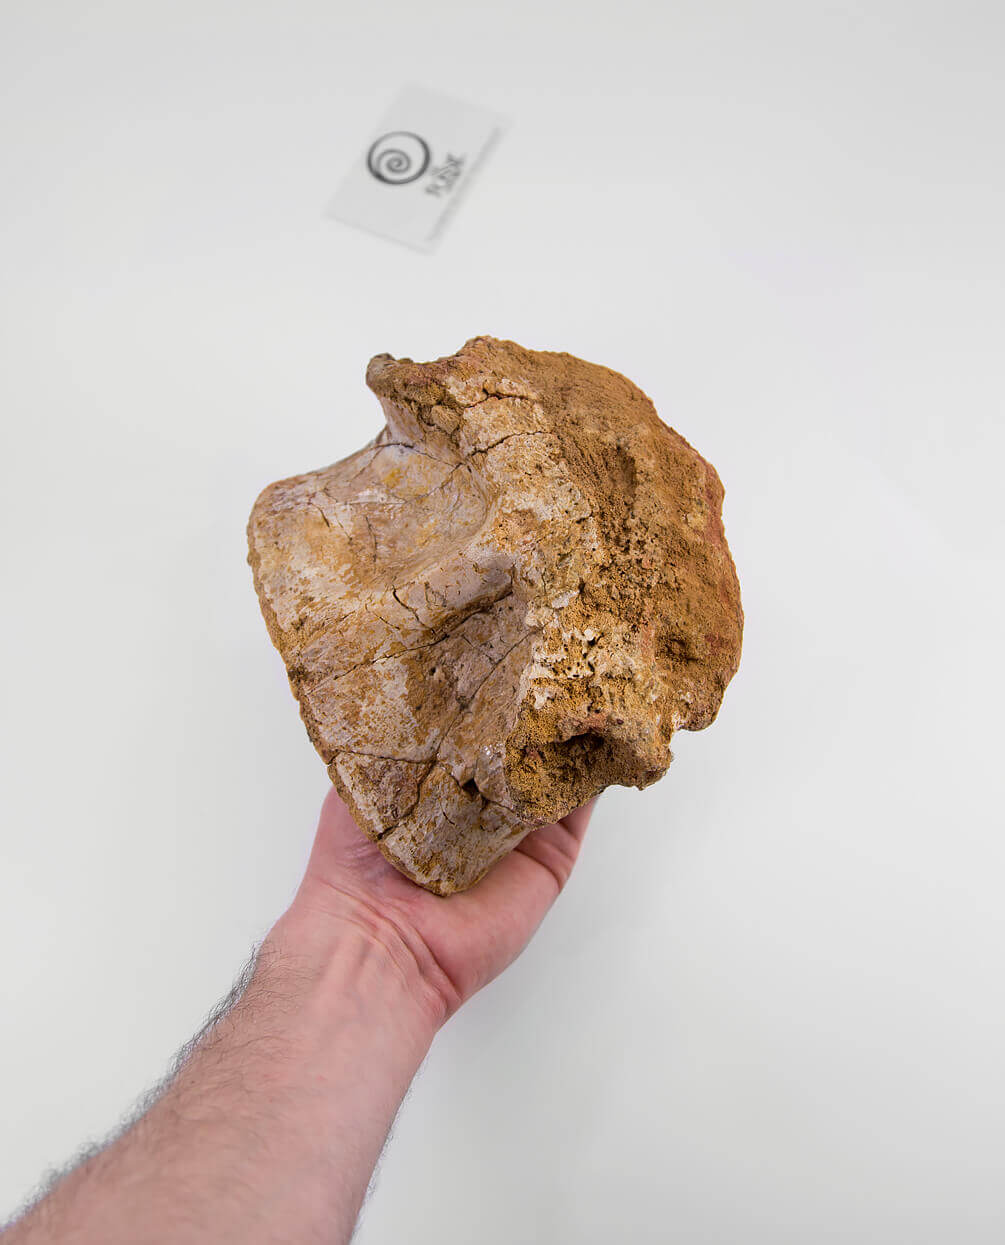 Scientifically important Spinosaurus aegyptiacus dinosaur fossil vertebra for sale measuring 175mm at THE FOSSIL STORE